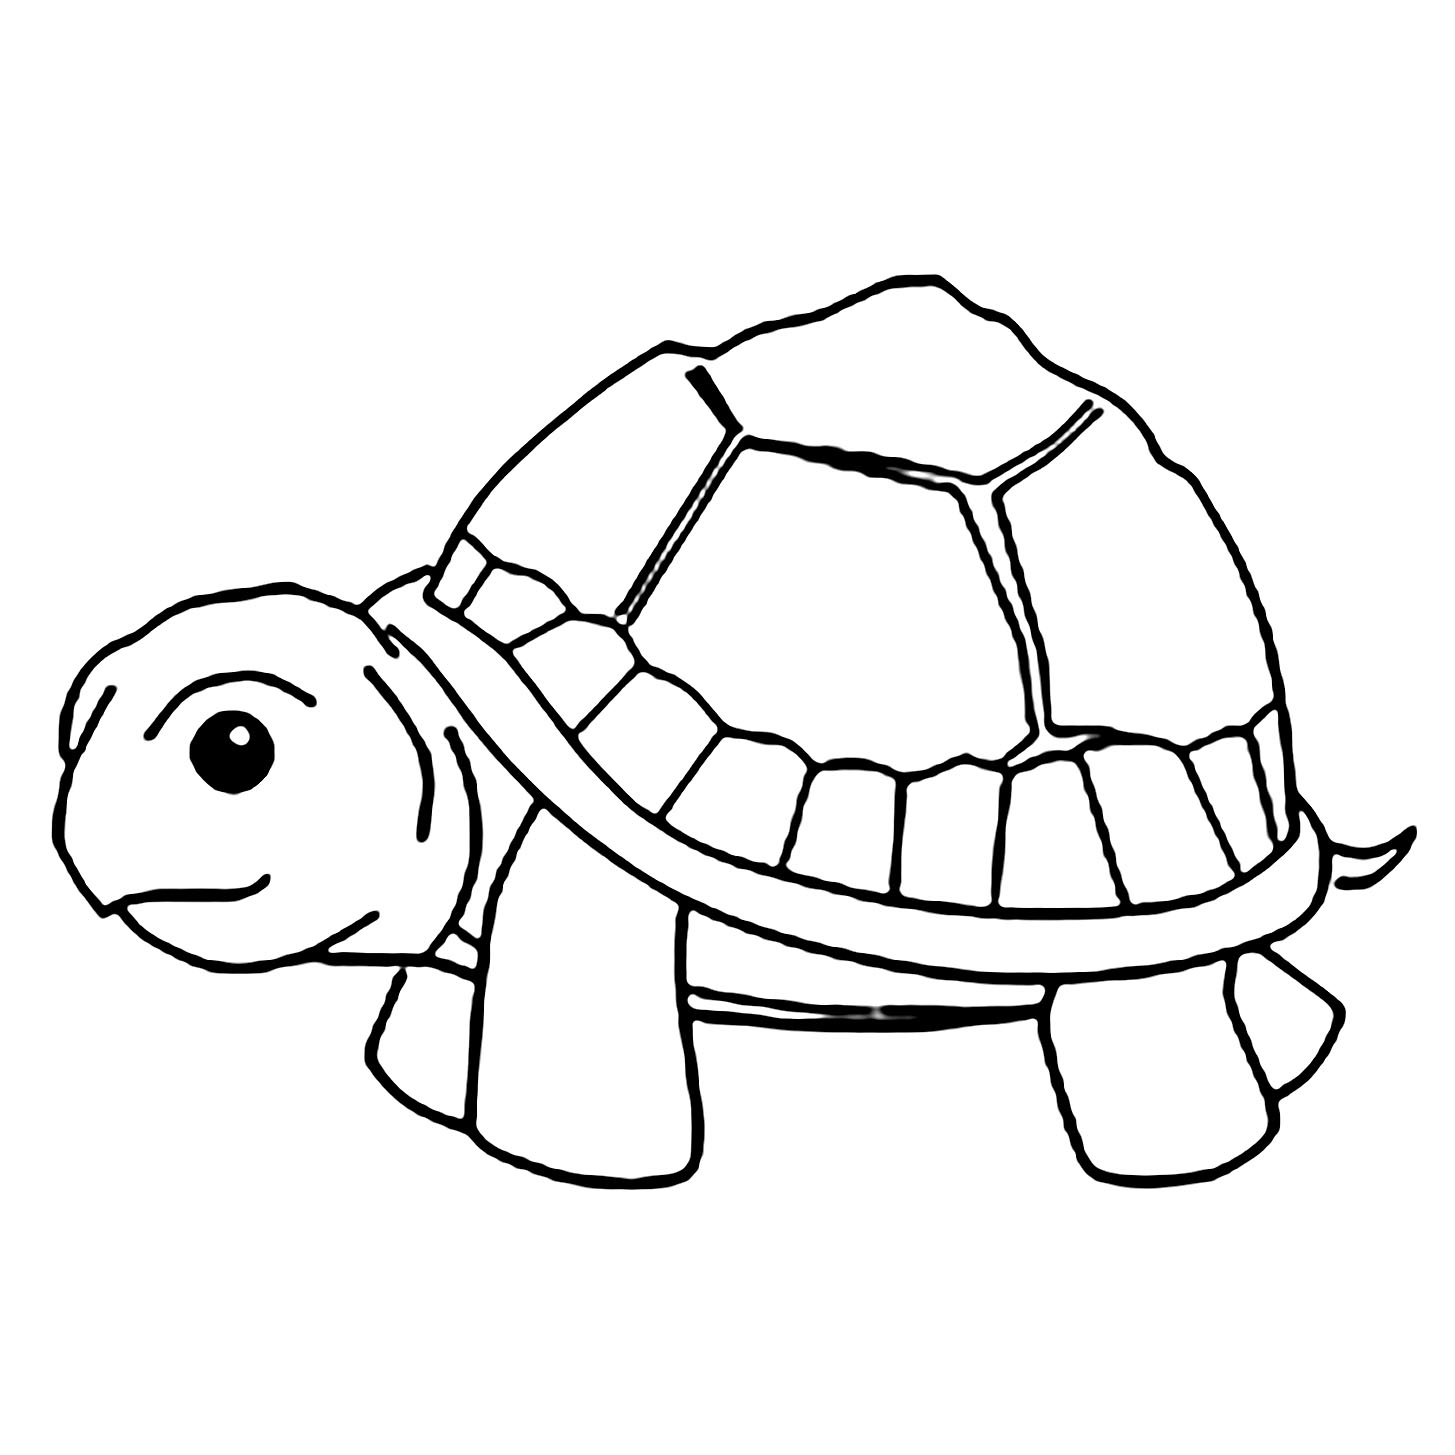 How to draw a Turtle for Kids | Art for Kids